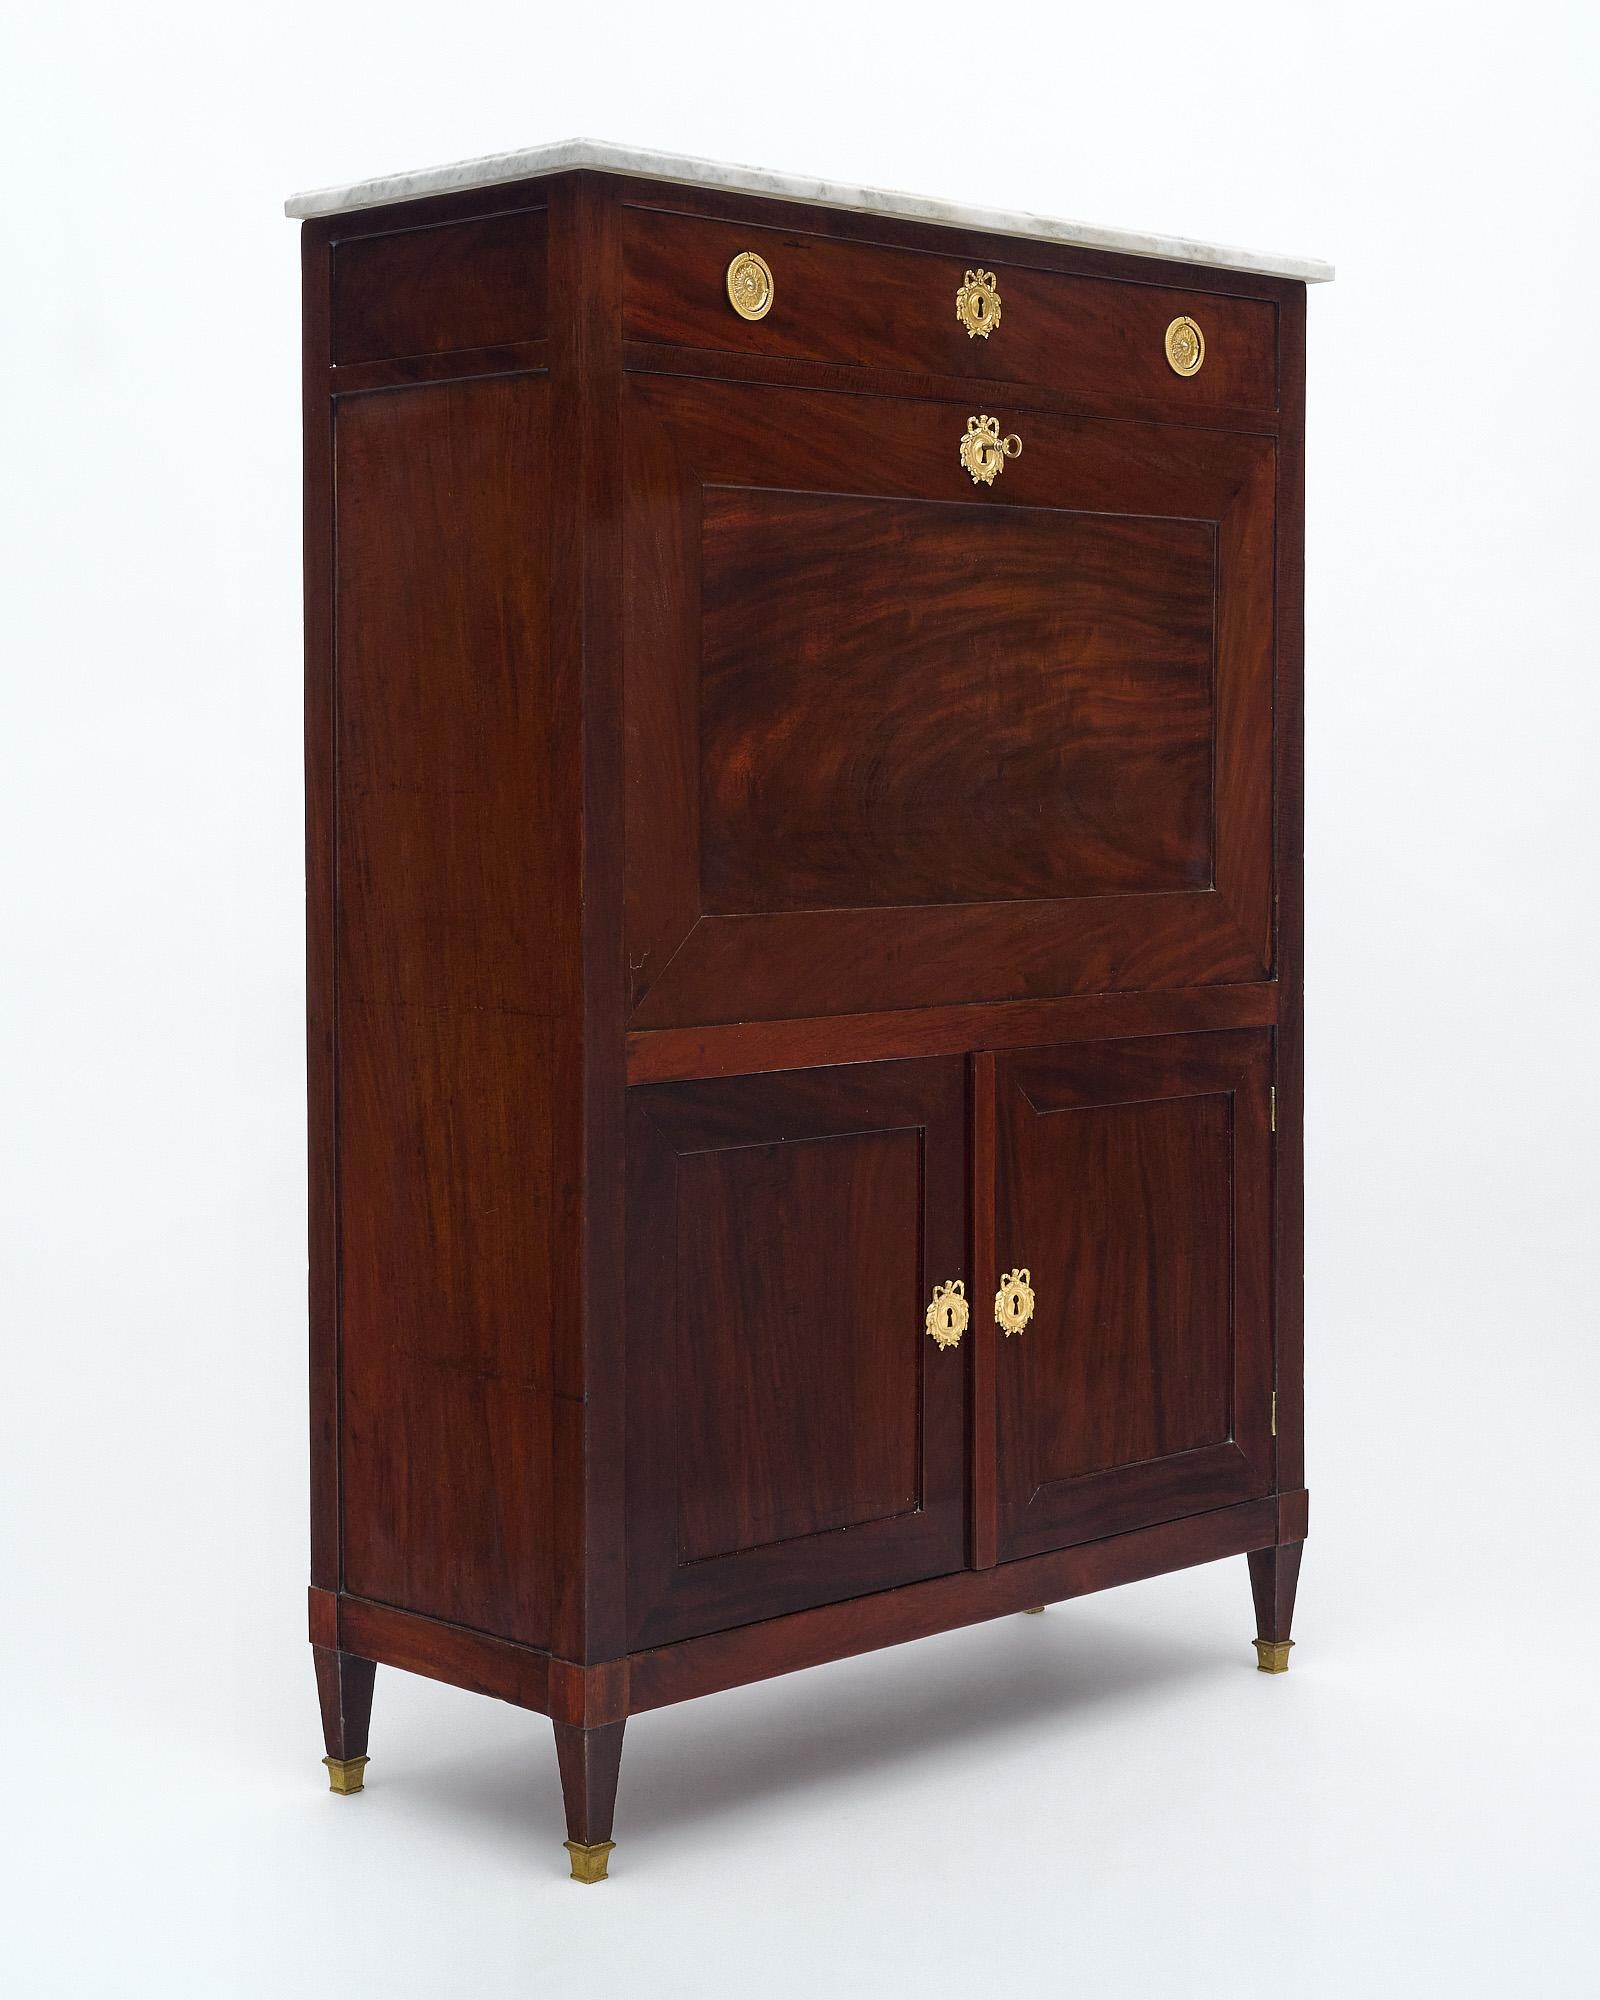 Secretary from France from the Directoire period. This piece is made of solid hand 